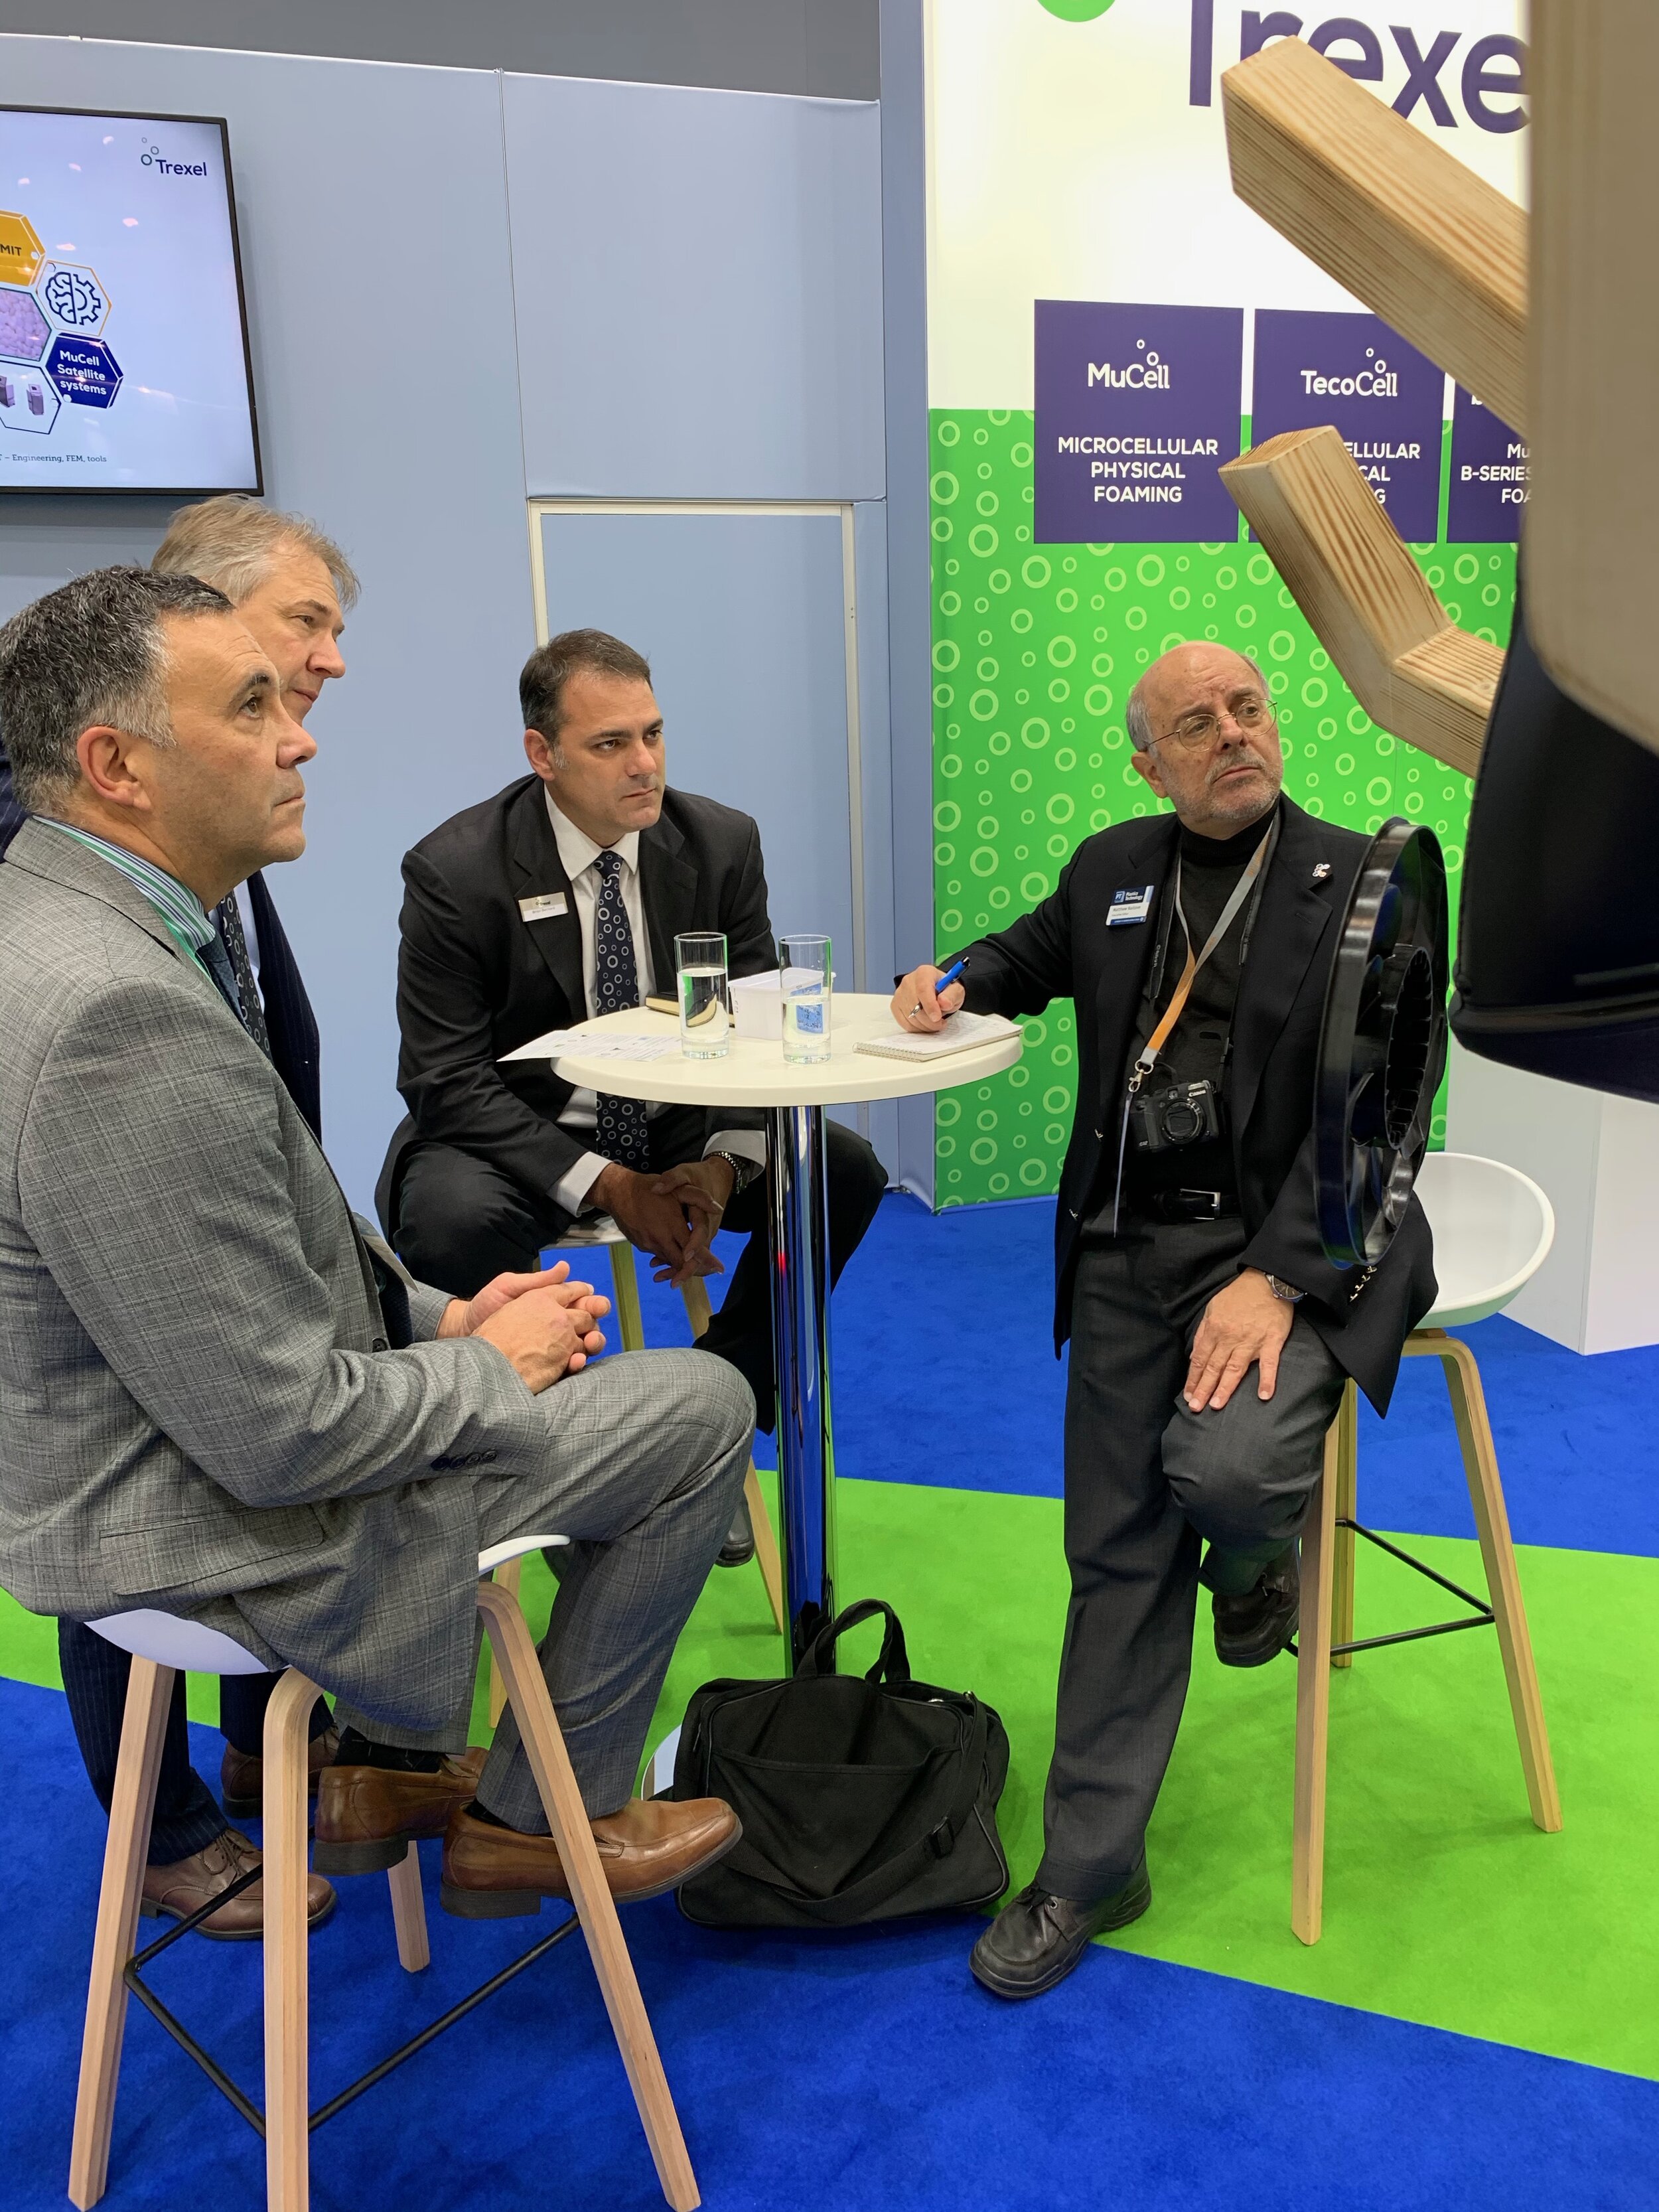   October 19: Matt Naitove (right), Editor of Plastics Technology magazine, meets with Trexel President Brian Bechard (second from right), Trexel Global Product Manager/Sales Markus Betsche, and Next Step’s Greg Hannoosh (left) at Trexel’s booth  